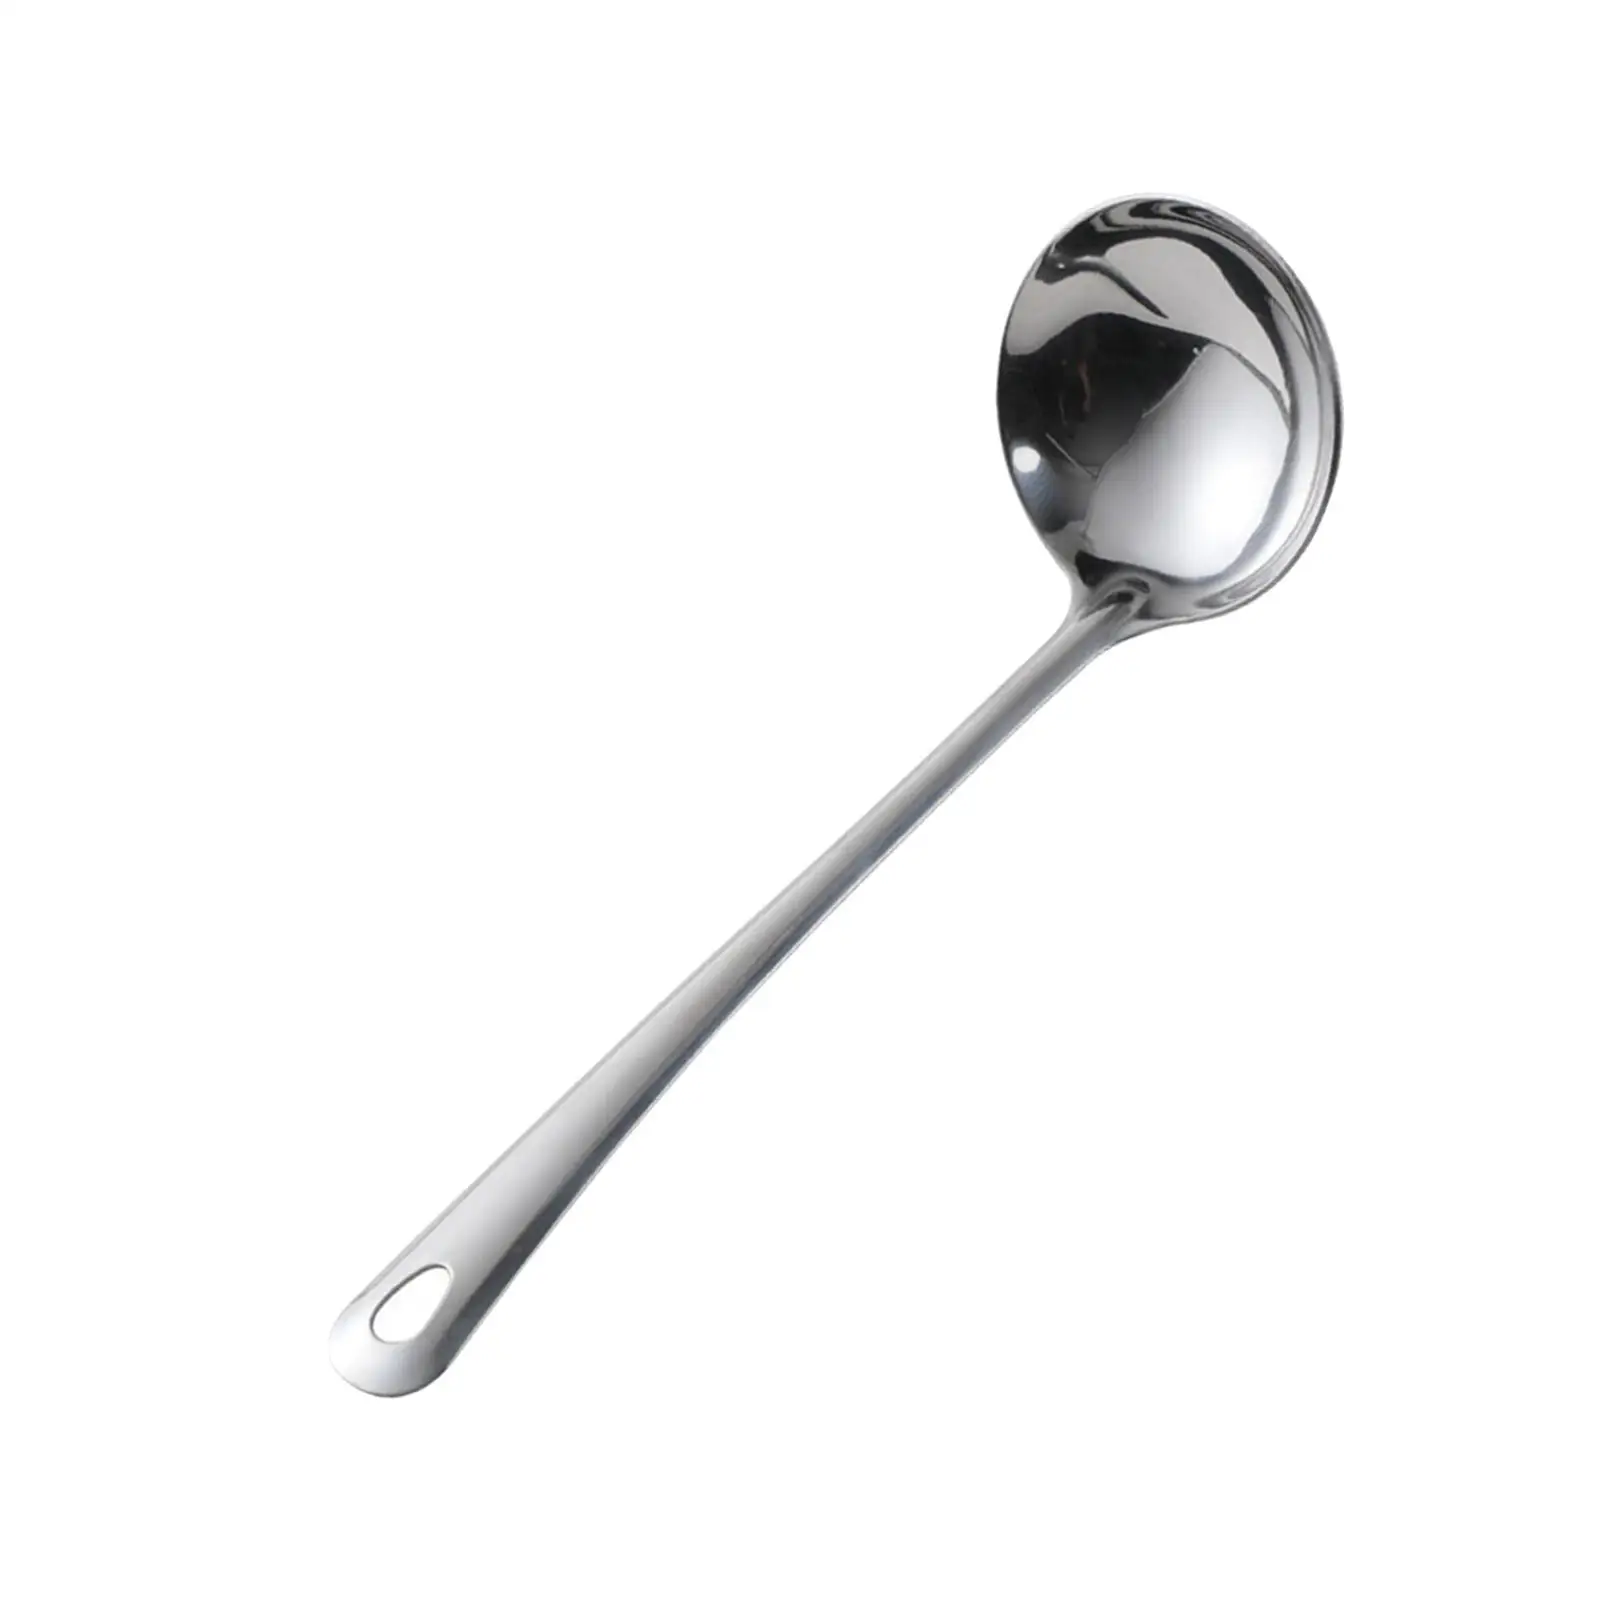 Soup Ladle Spoon Stainless Steel Comfortable Grip Cooking Ladle for Gravy Salad Dressing